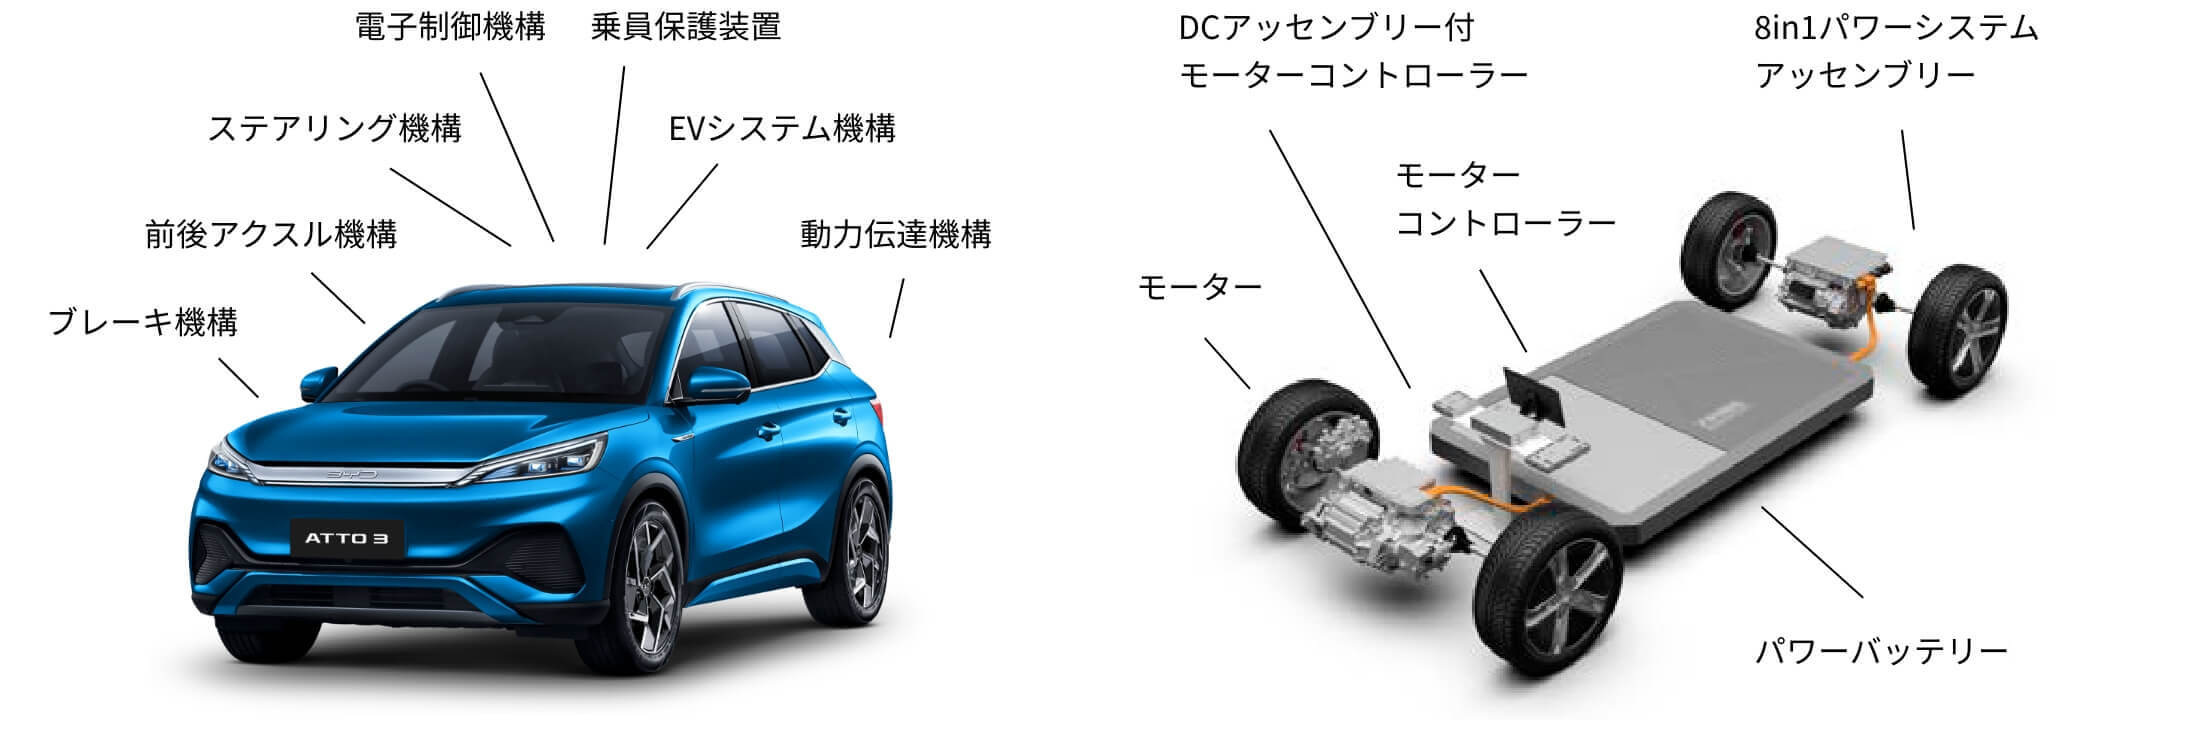 BYD ATTO 3の各種機構・装置・バッテリー